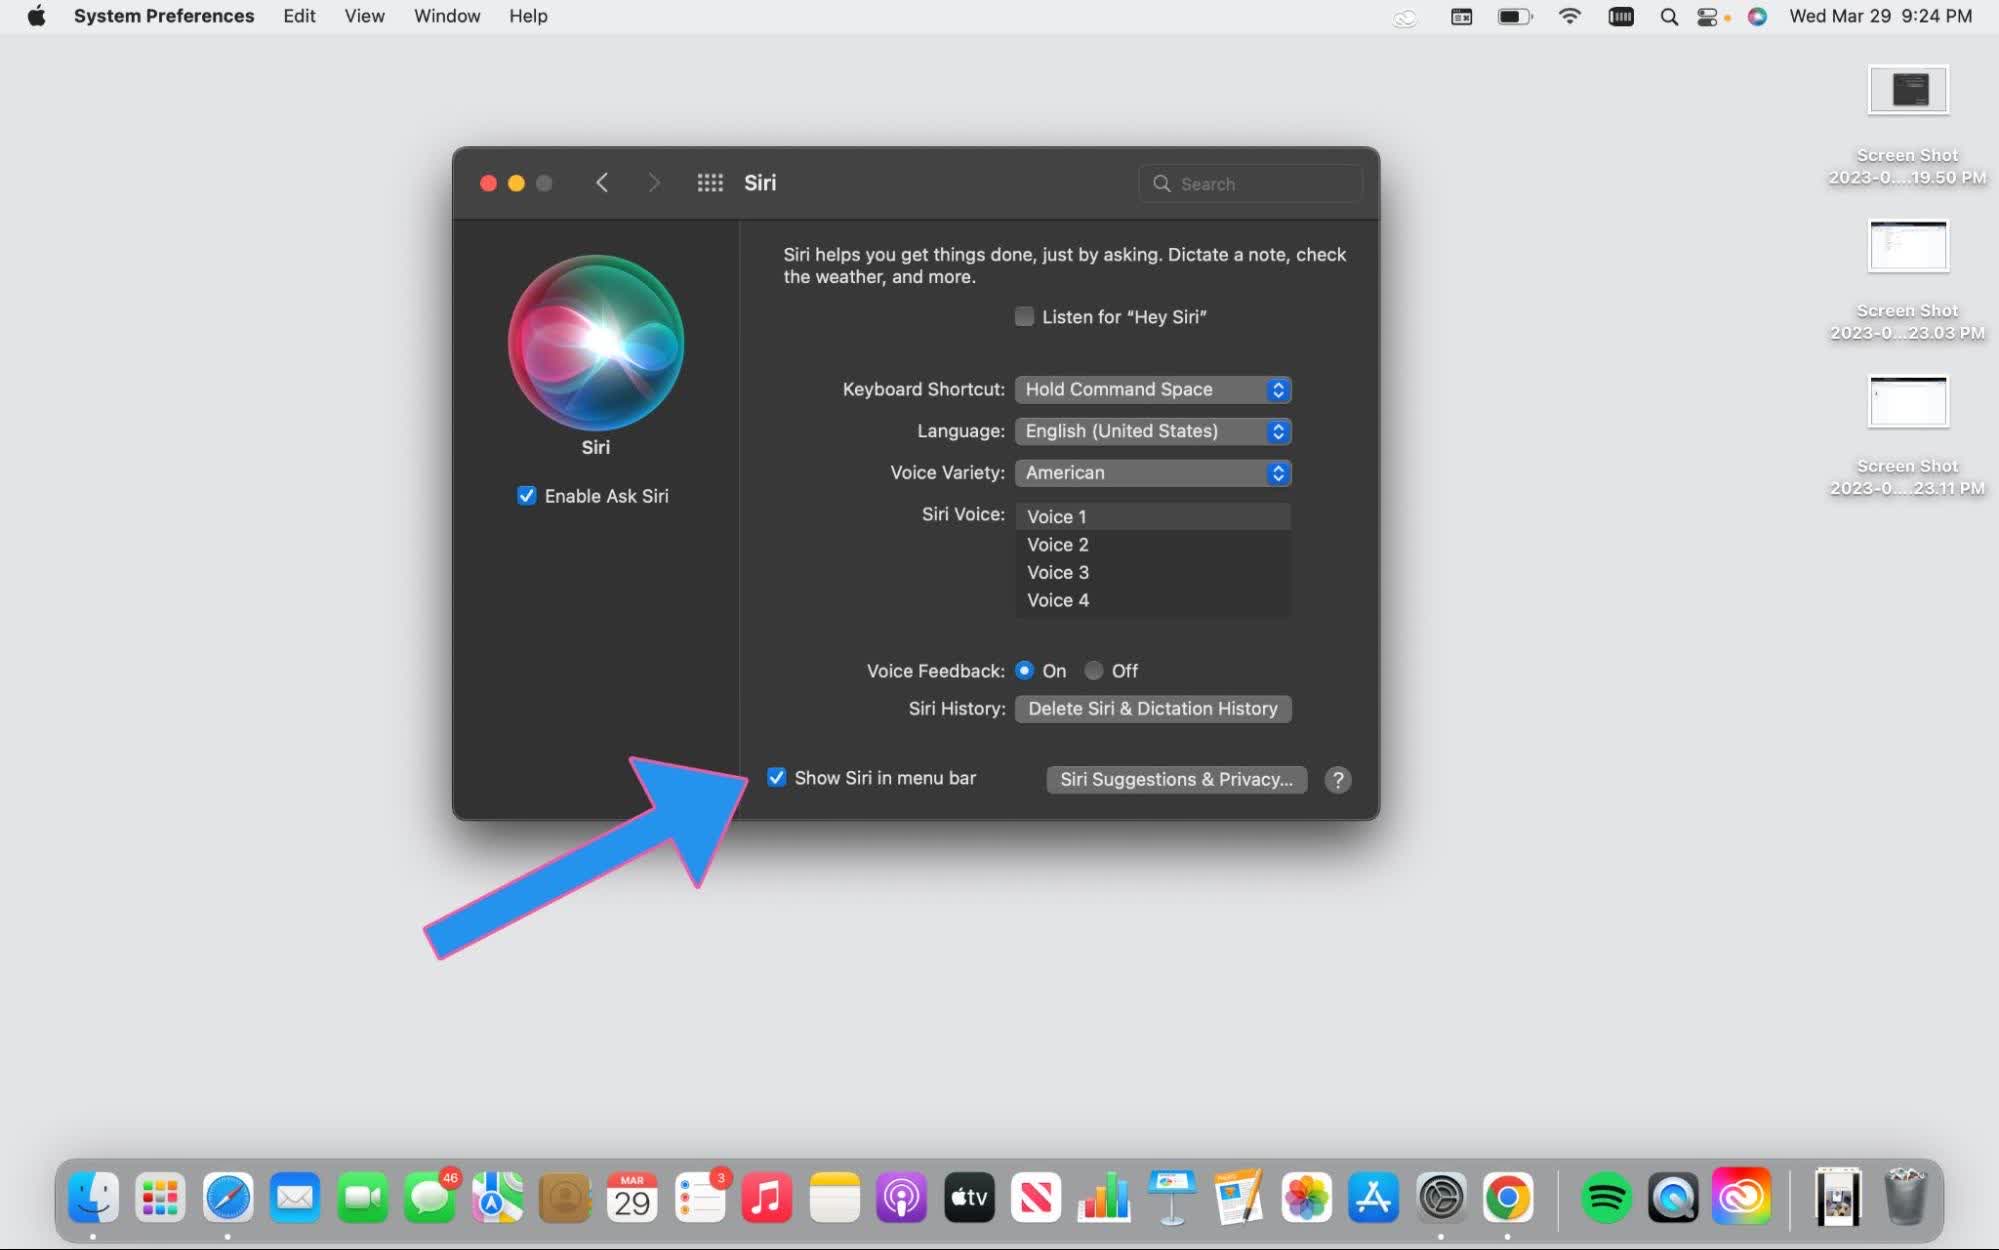 enable it in System Preferences